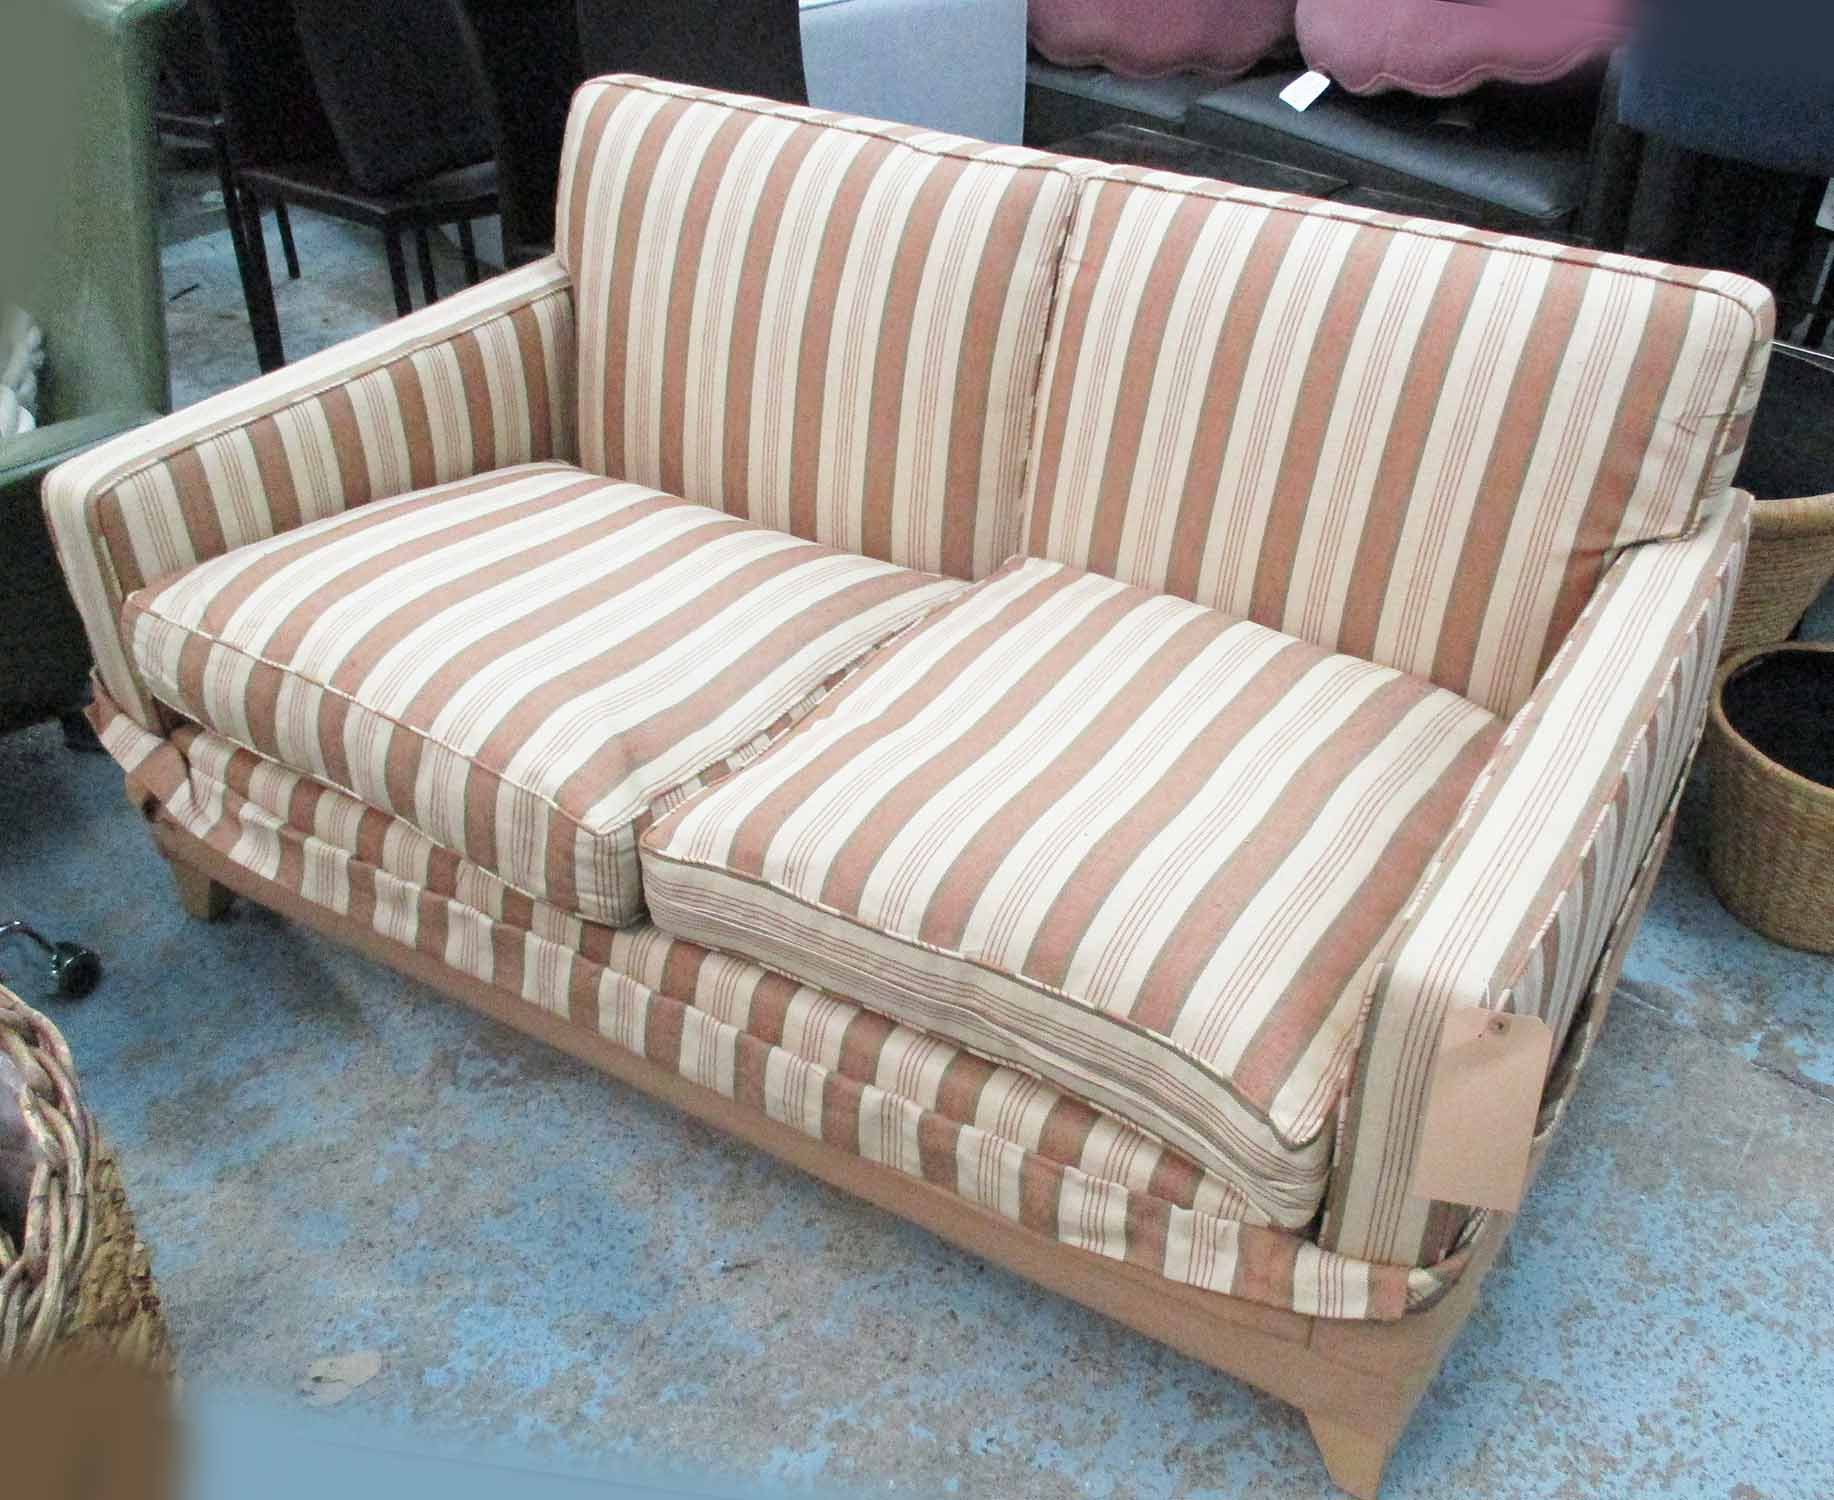 KINGCOME SOFA, of compact proportions, striped, 148cm x 85cm x 77cm H.